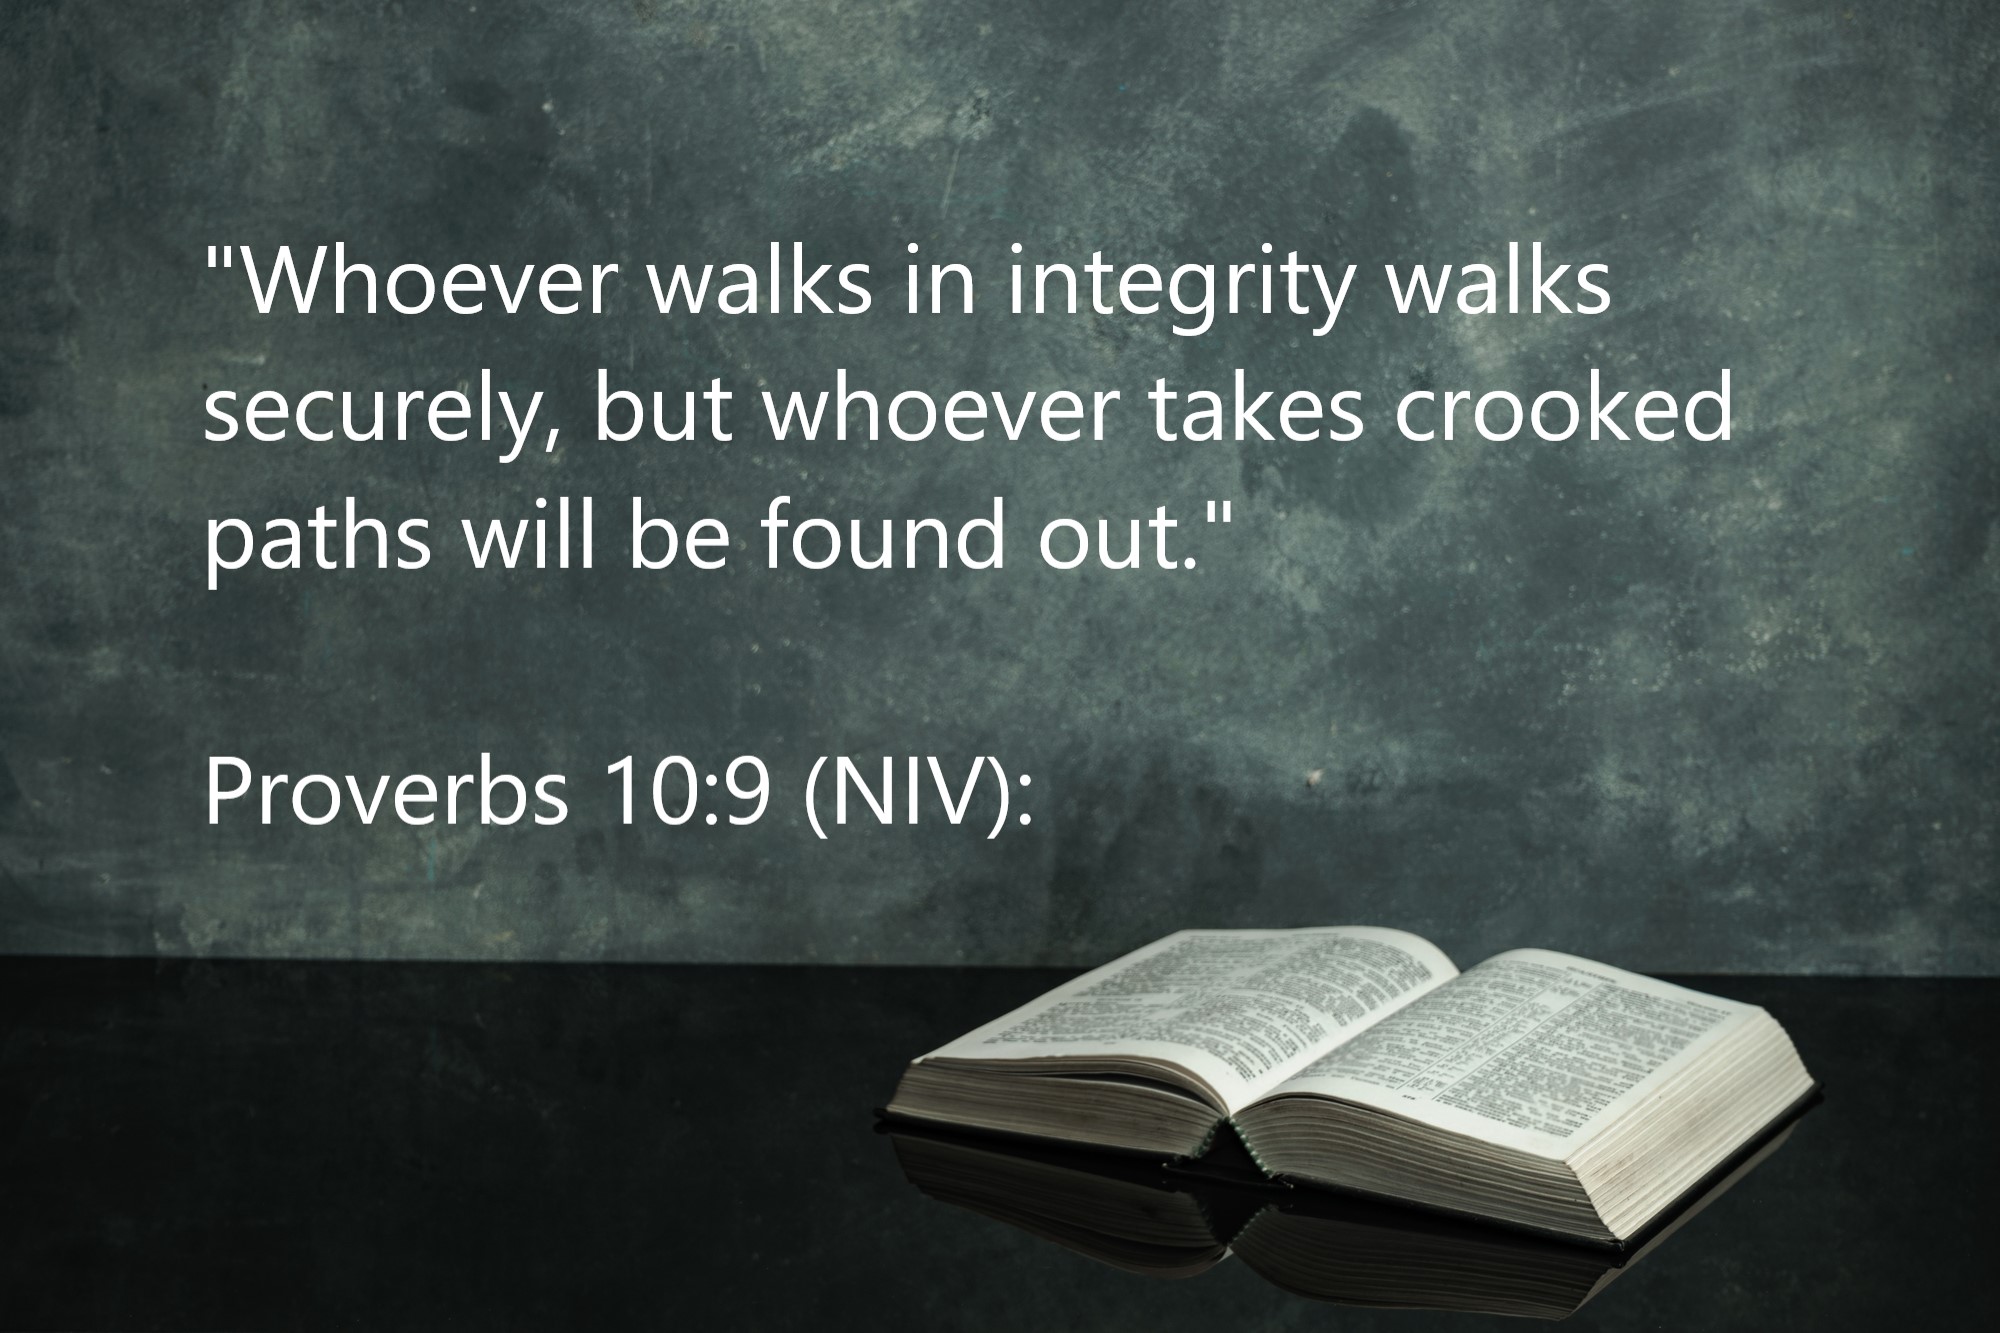 Proverbs 10:9 (NIV): "Whoever walks in integrity walks securely, but whoever takes crooked paths will be found out." 